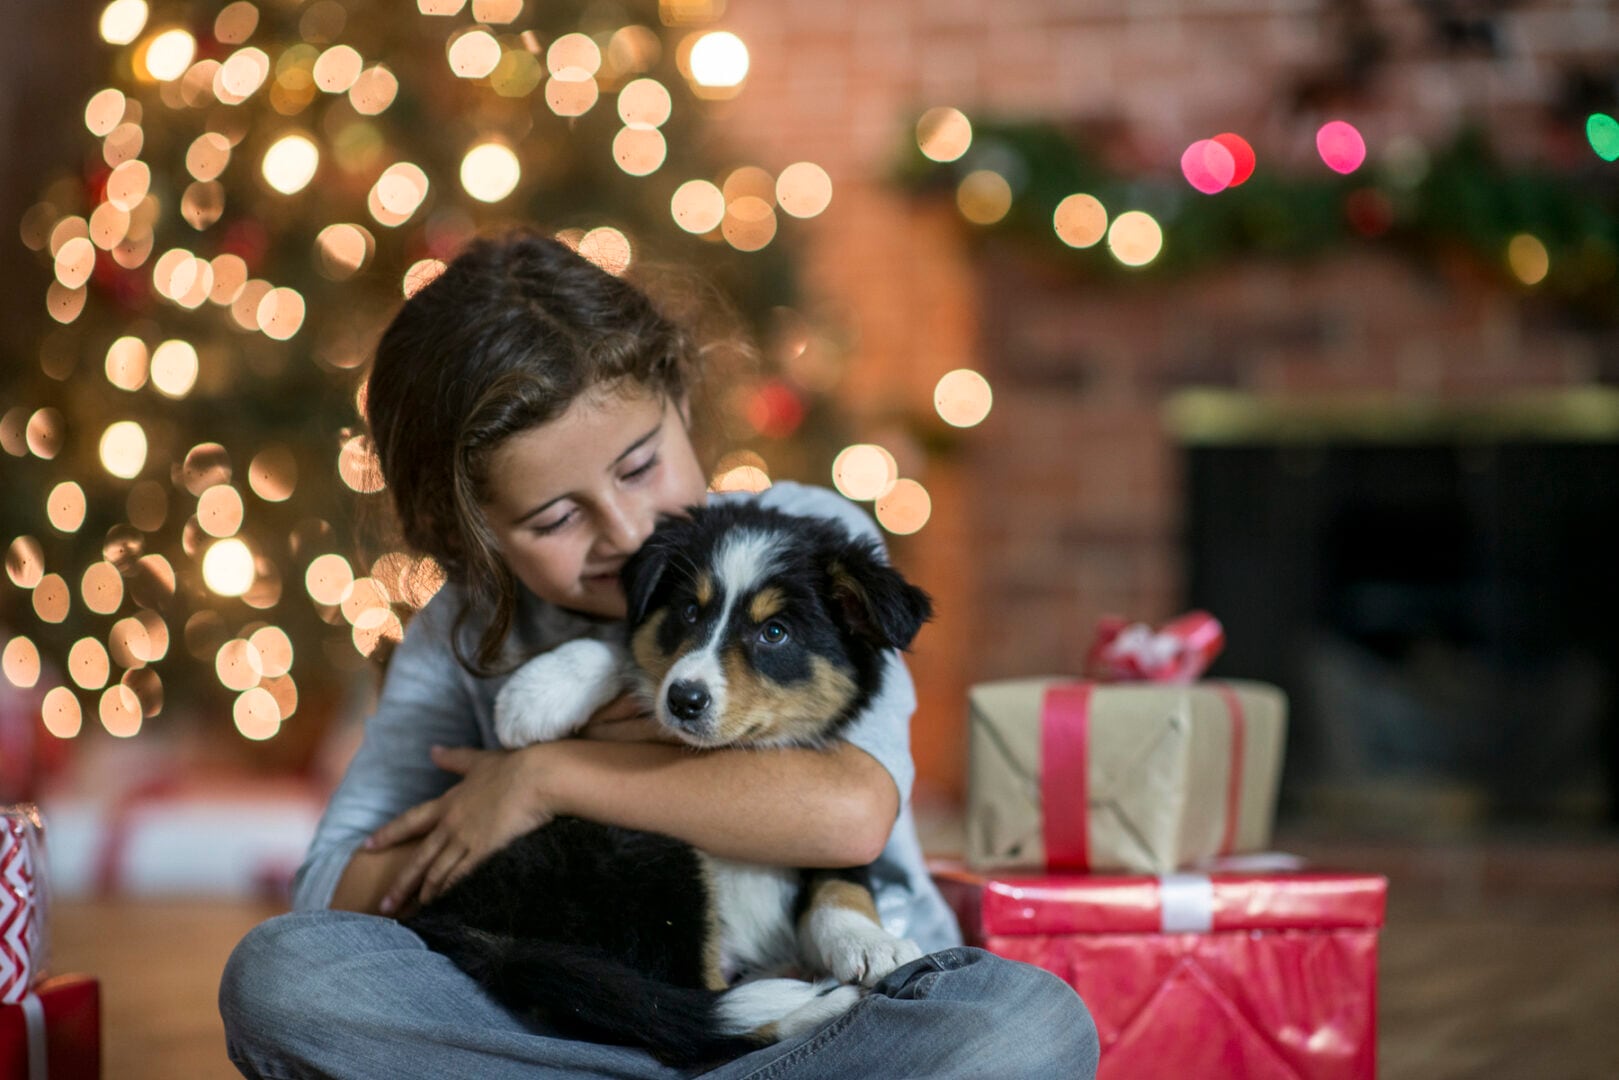 Considering gifting a pet? 6 steps to take first